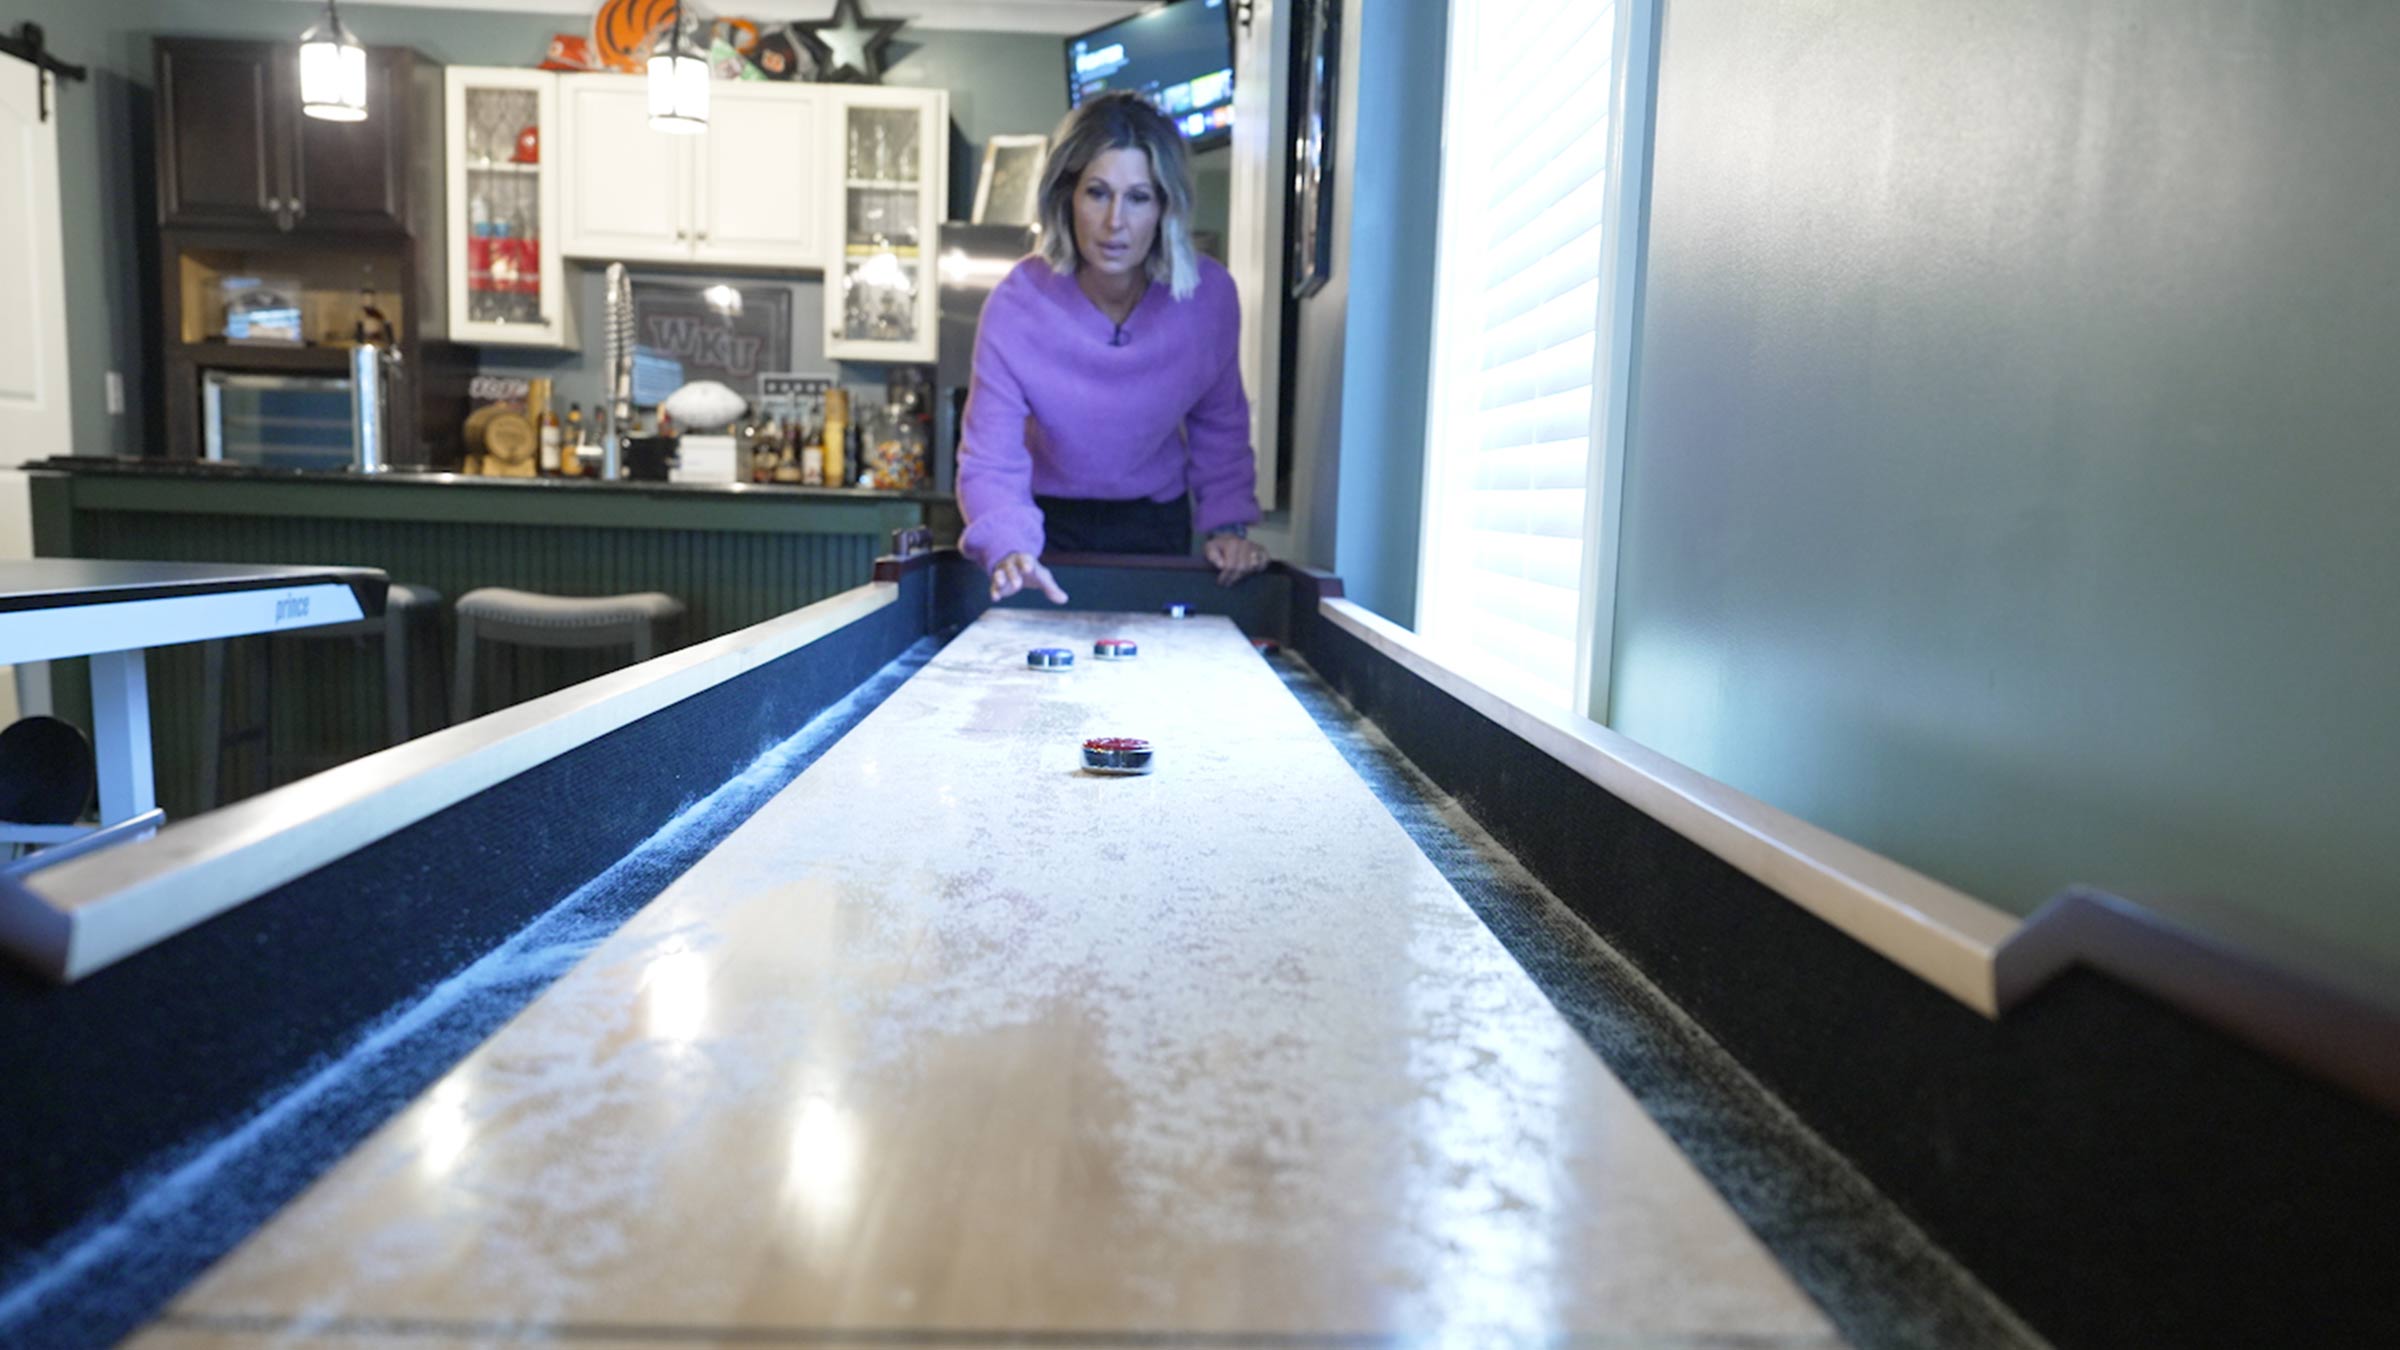 Chasity Harney playing shuffleboard in her kitchen